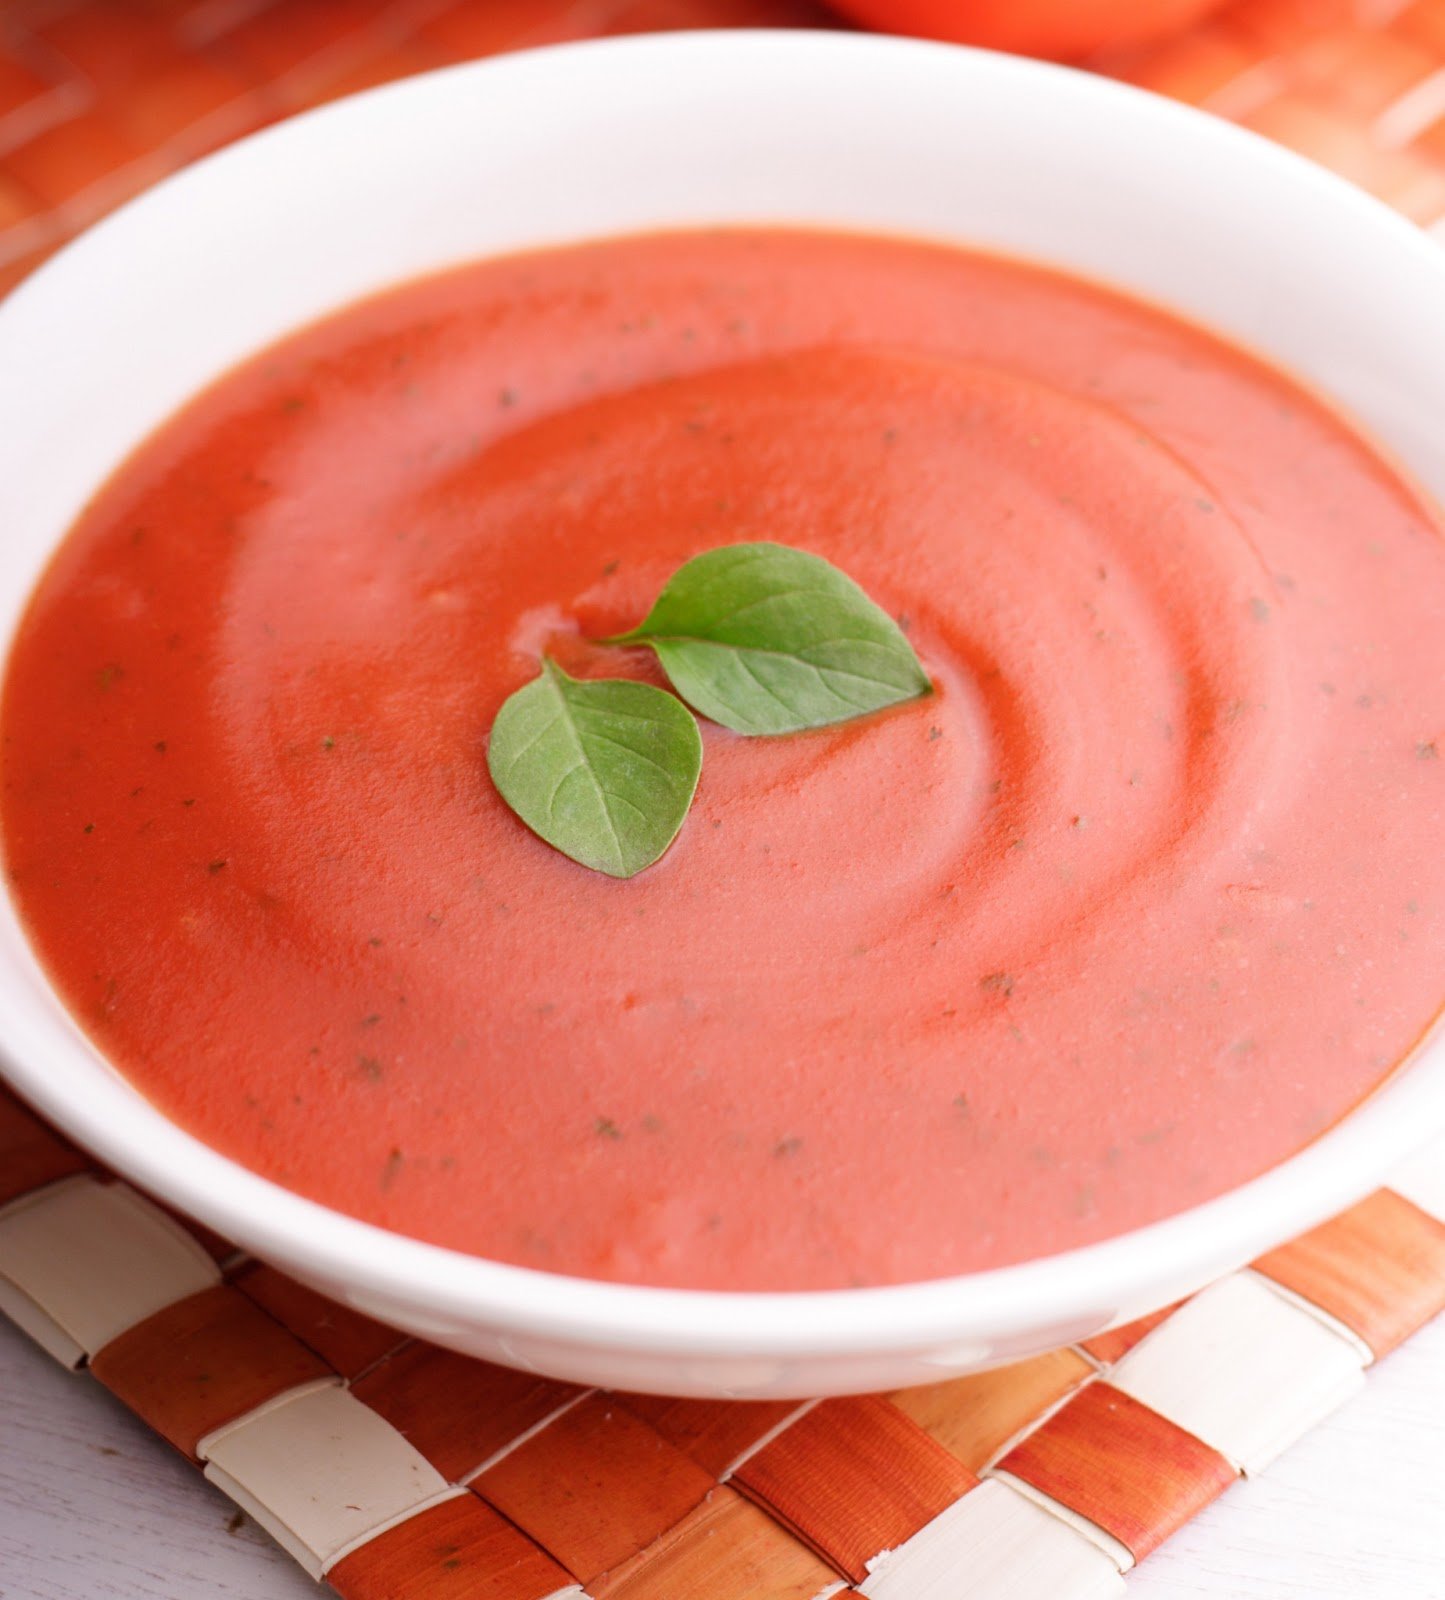 Everything for Ana: Review: Dei Fratelli Gluten Free Tomato Soup, yum!